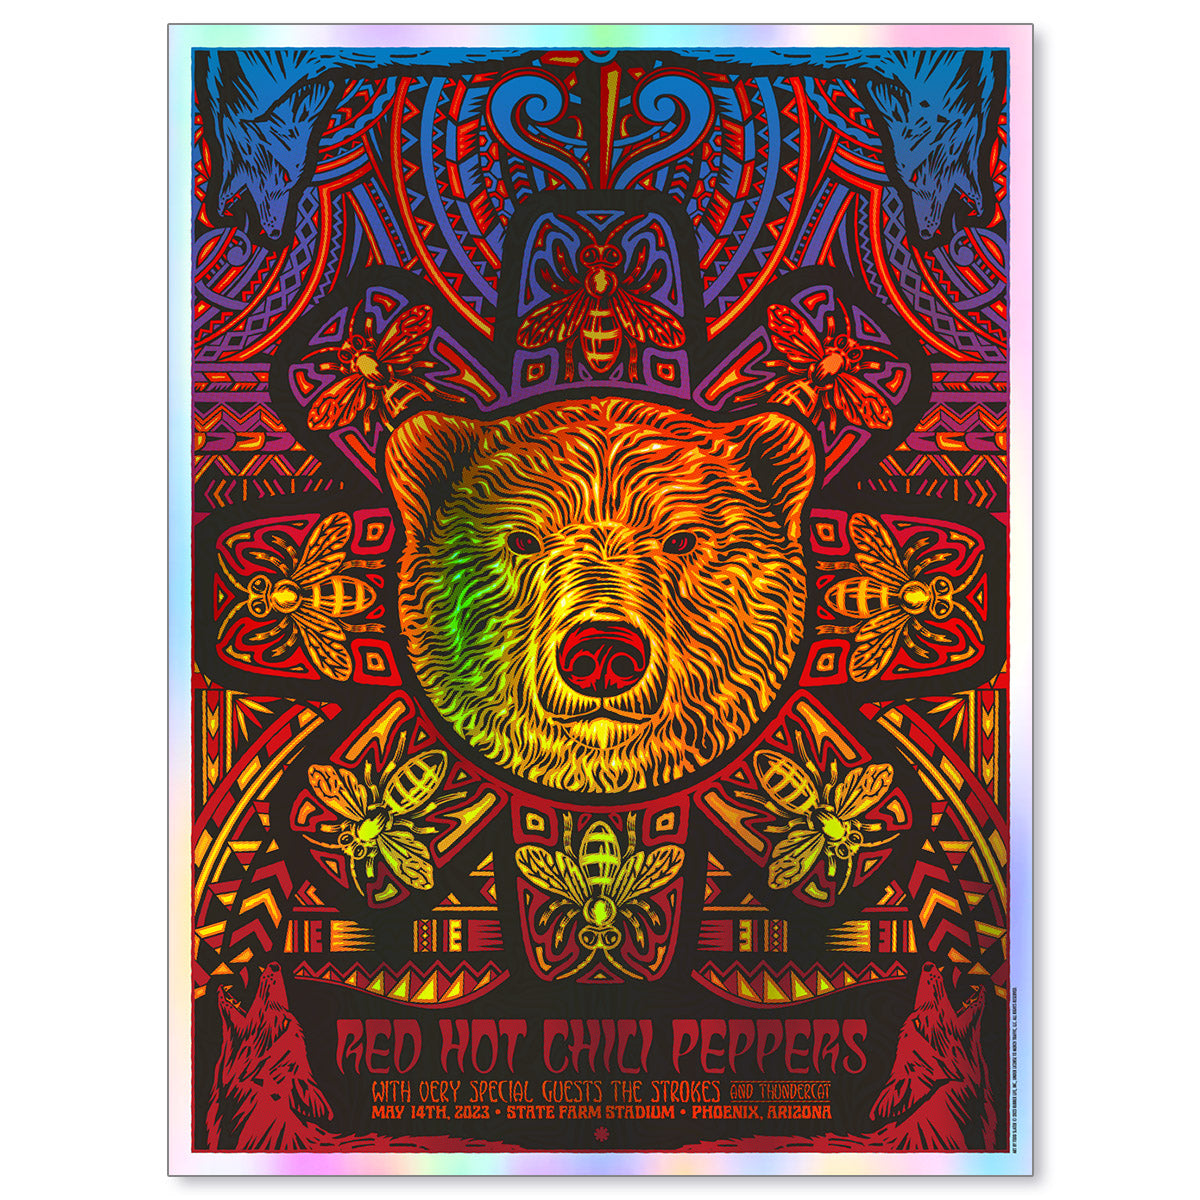 Red Hot Chili Peppers Phoenix May 14, 2023 Rainbow Foil Poster & Trading Card